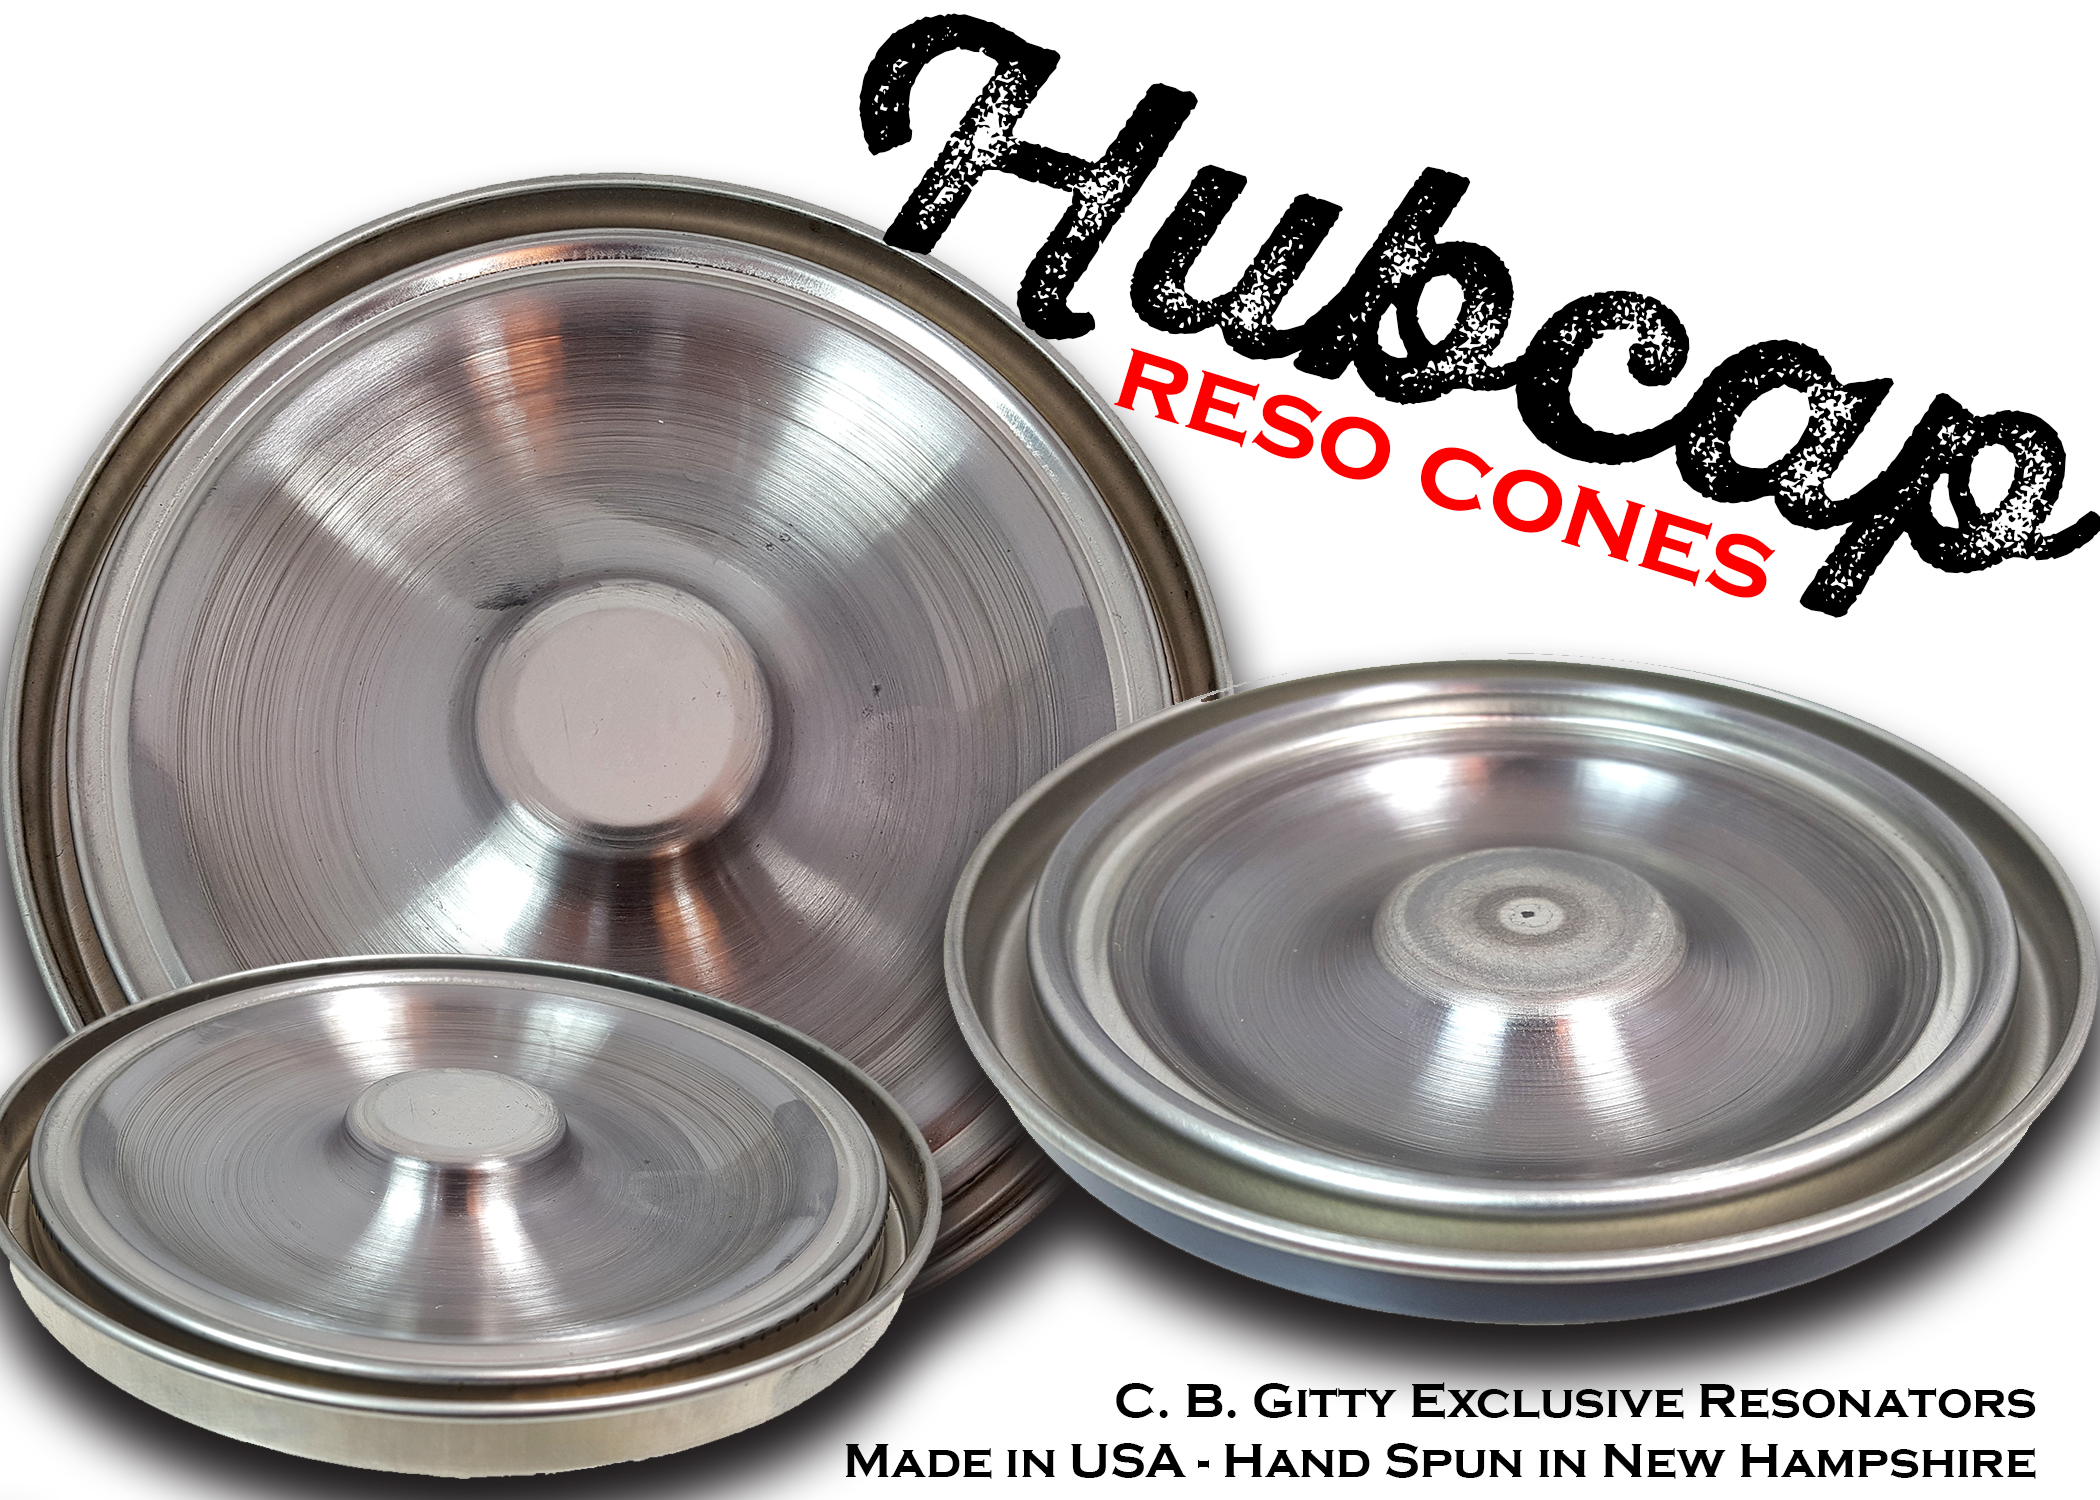 Hubcap Resonator Cones Hand-Spun from Paint Can Lids